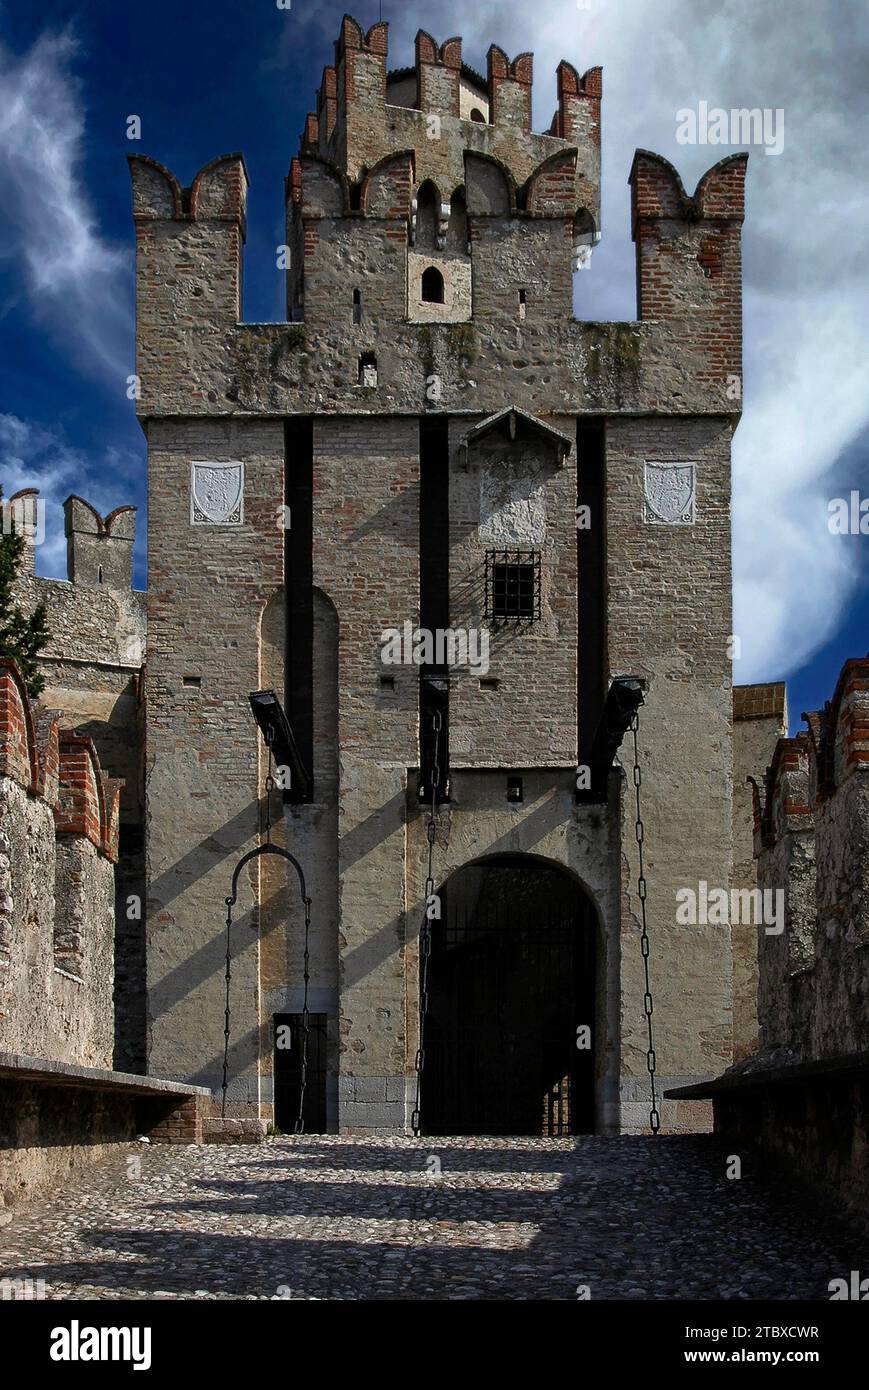 Southern entrance, with drawbridges lowered, to the Castello Scaligero or Rocca Scaligera, at Sirmione on Lake Garda in Lombardy, Italy.  Built in the 1300s and surrounded by a natural moat, the castle takes its name from the Della Scala family, ruling dynasty in Verona, who dominated the area at the time.  It is one of the best-preserved Scaliger fortresses. Stock Photo